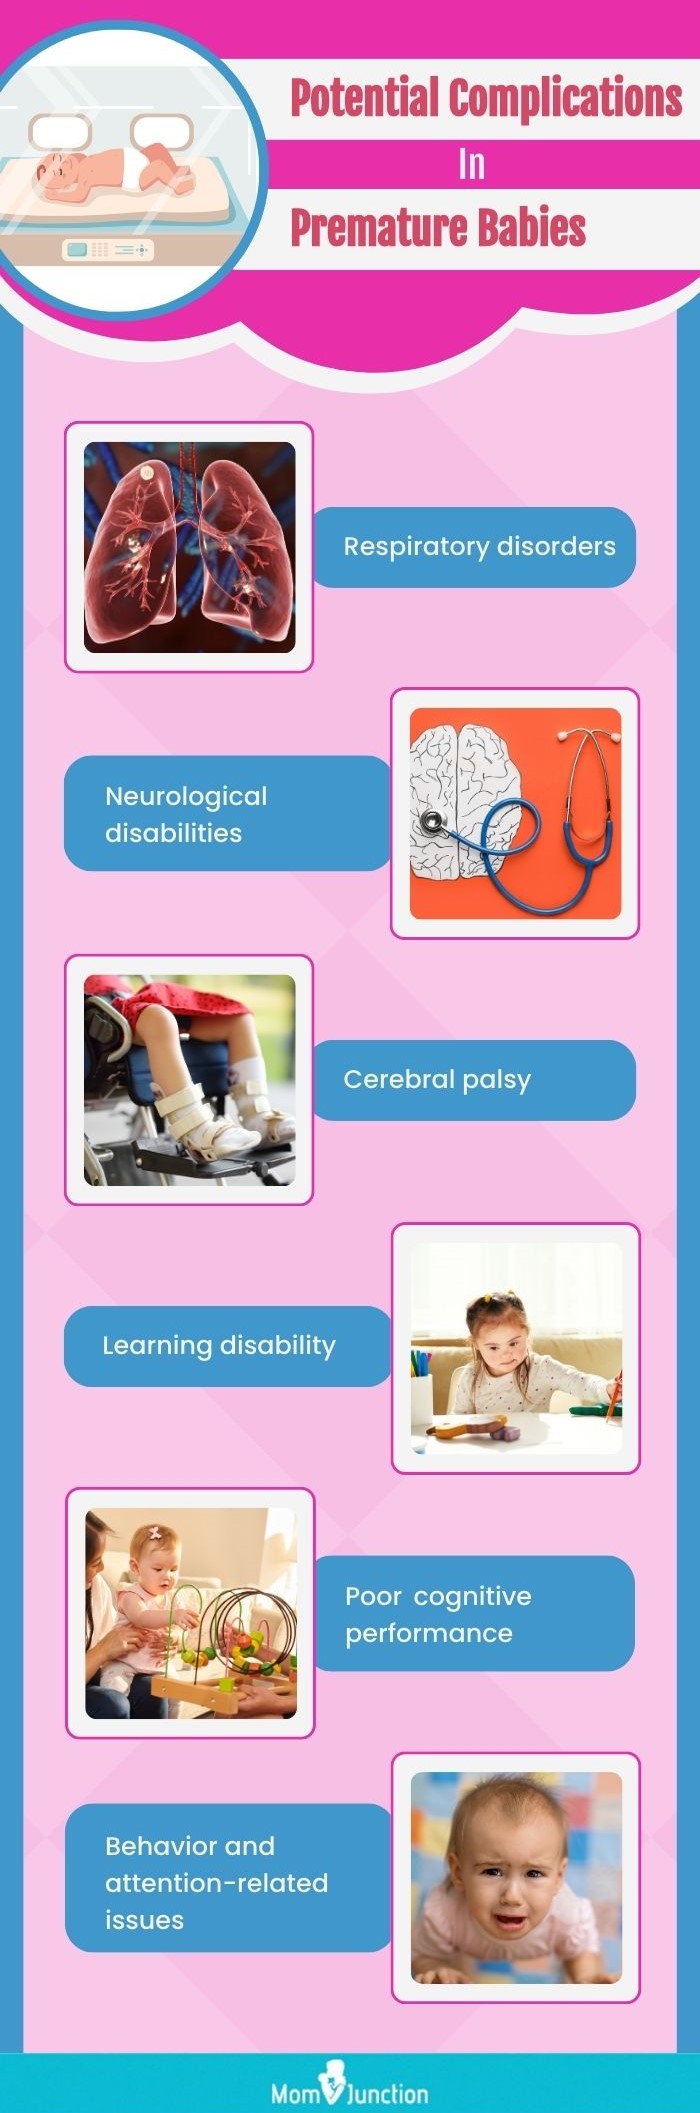 potential complications in premature babies (infographic)